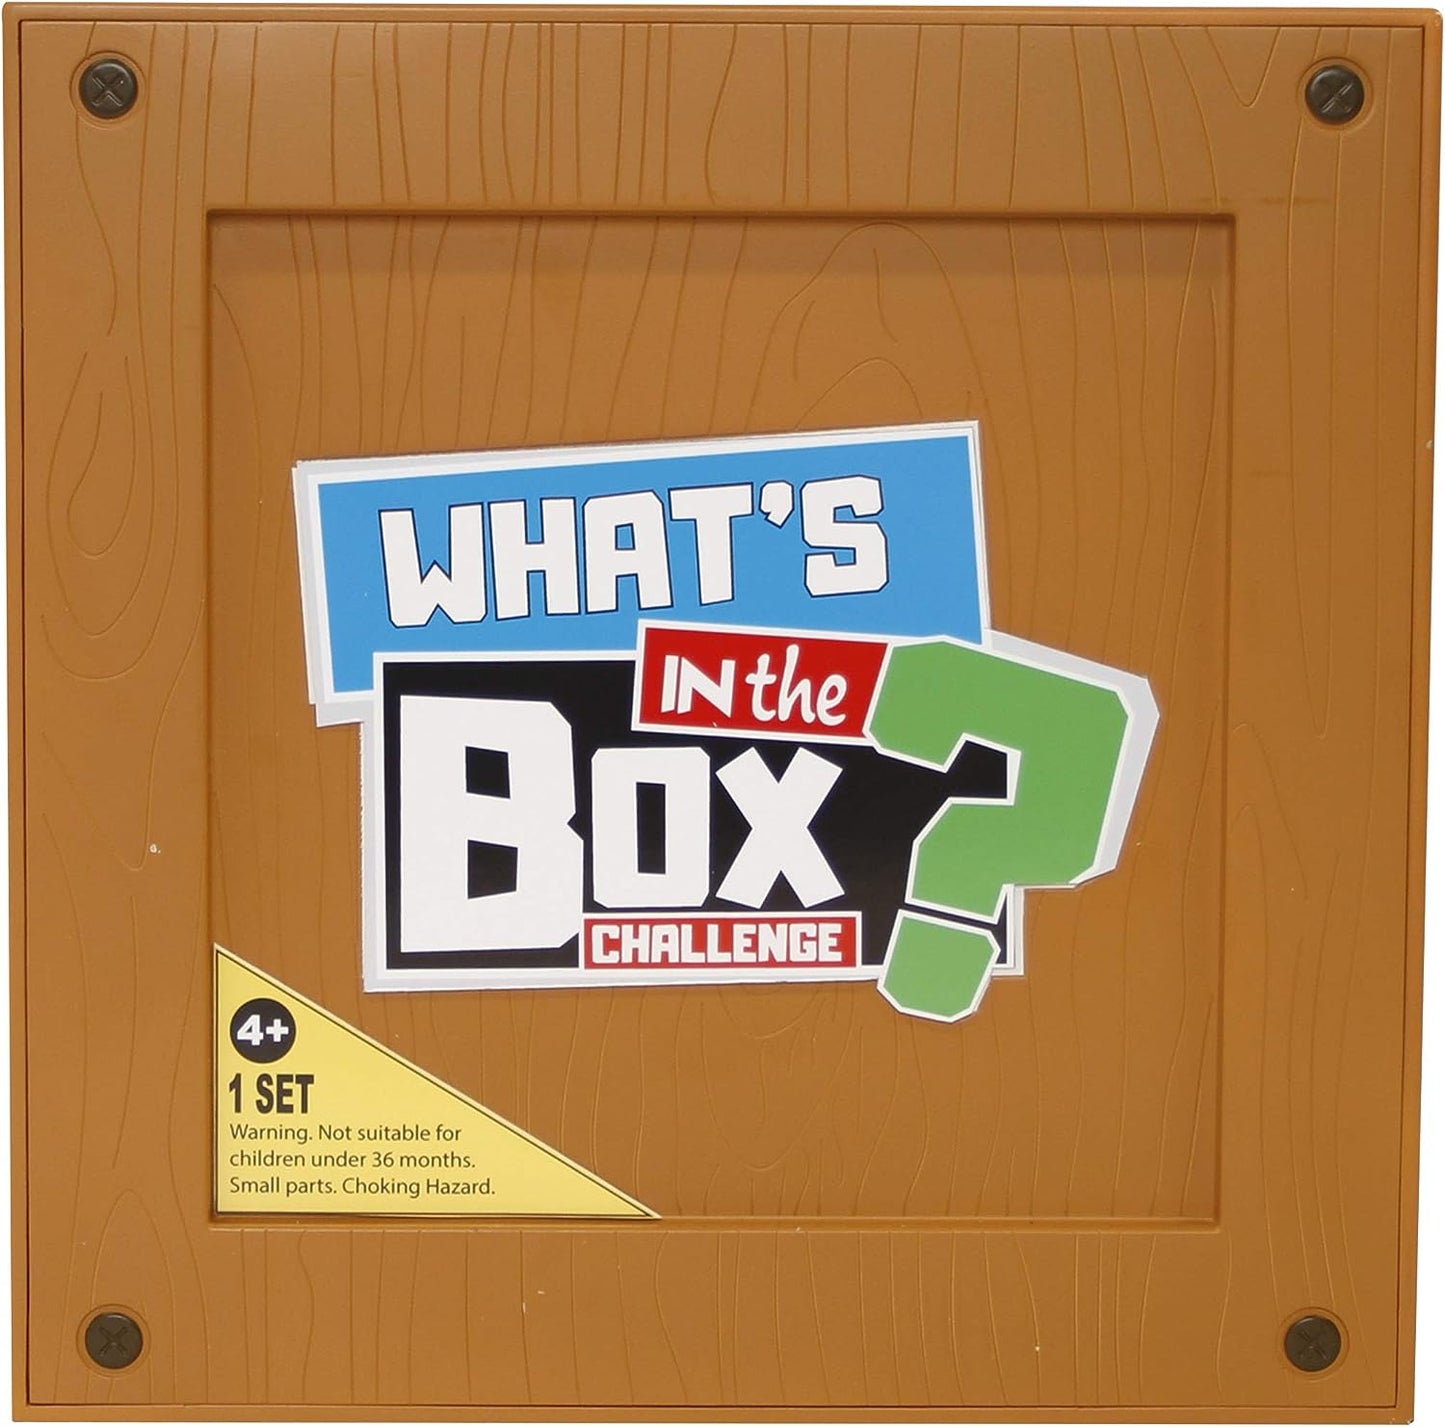 Whats In the Box